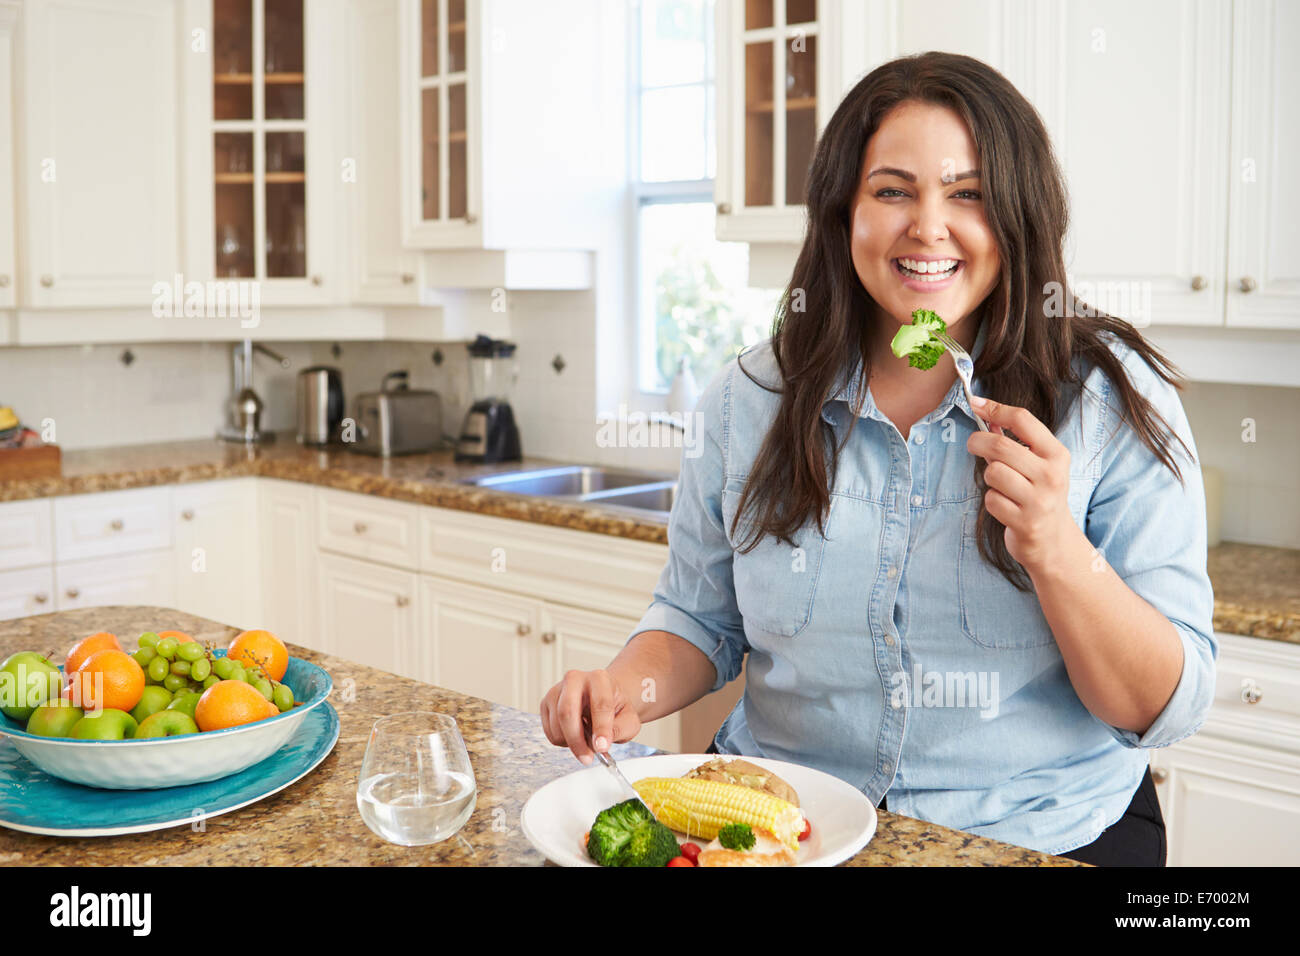 Overweight Woman Eating Healthy Meal In Kitchen Stock Photo